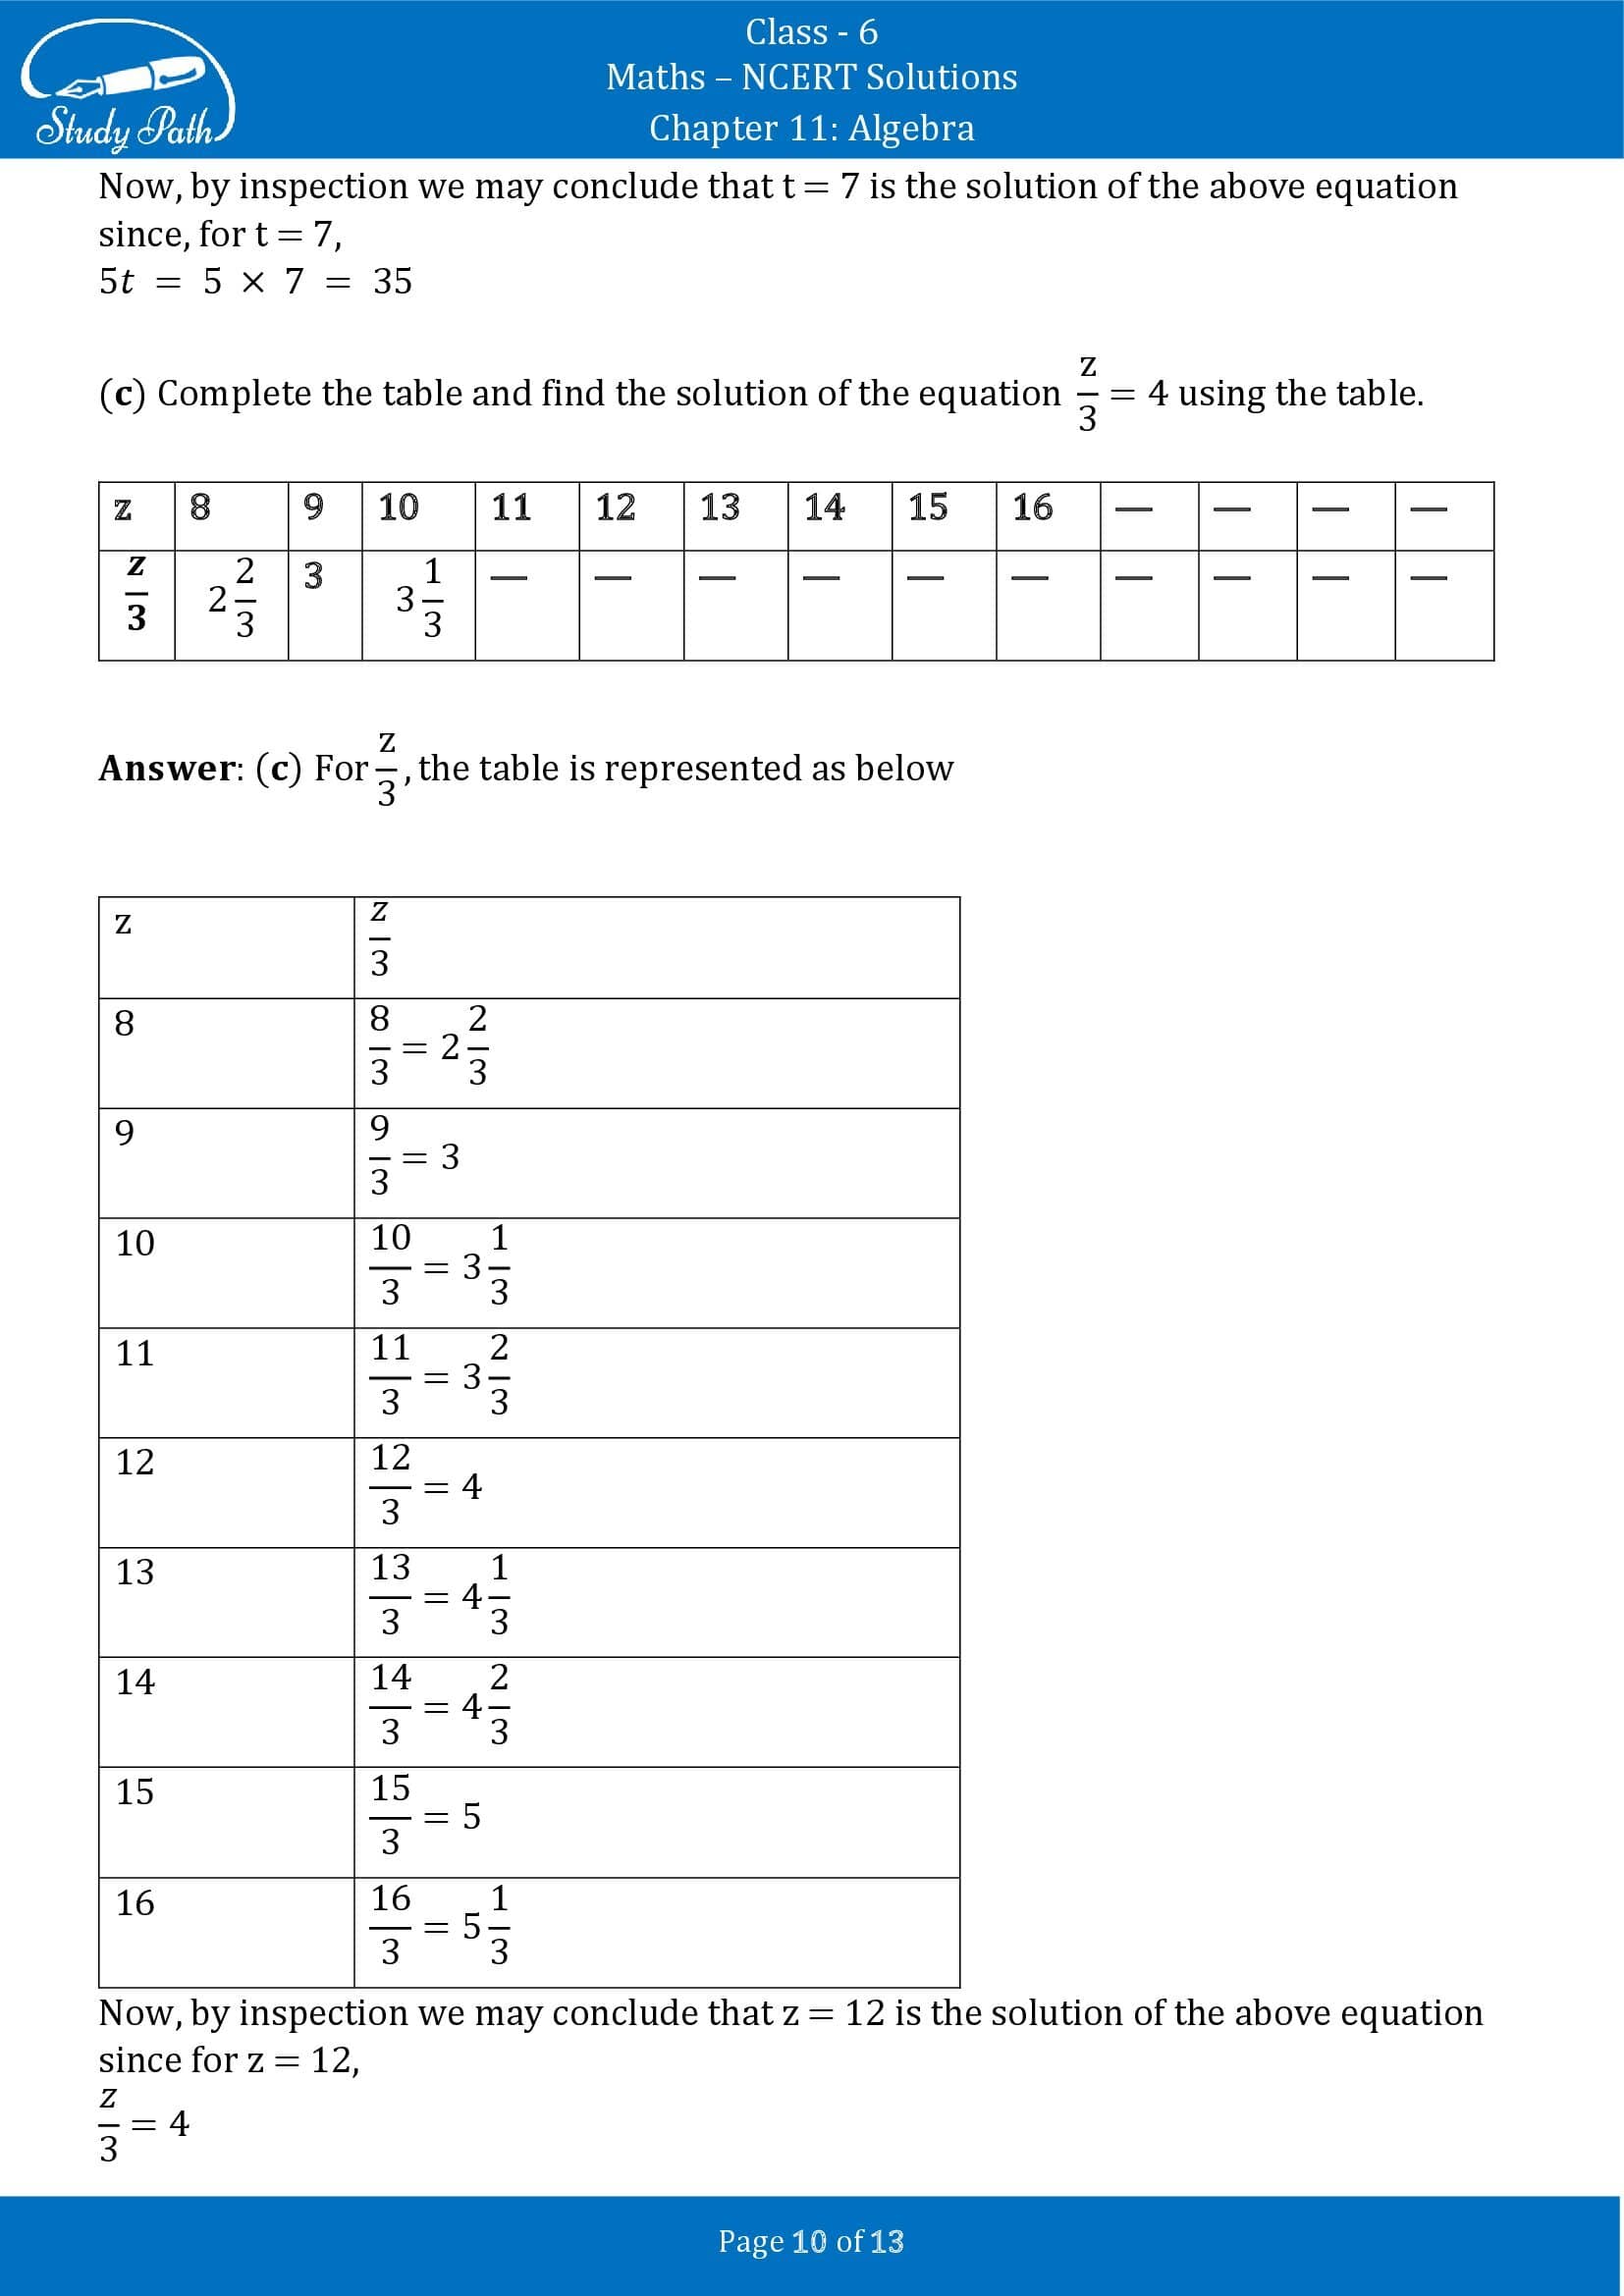 NCERT Solutions for Class 6 Maths Chapter 11 Algebra Exercise 11.5 00010